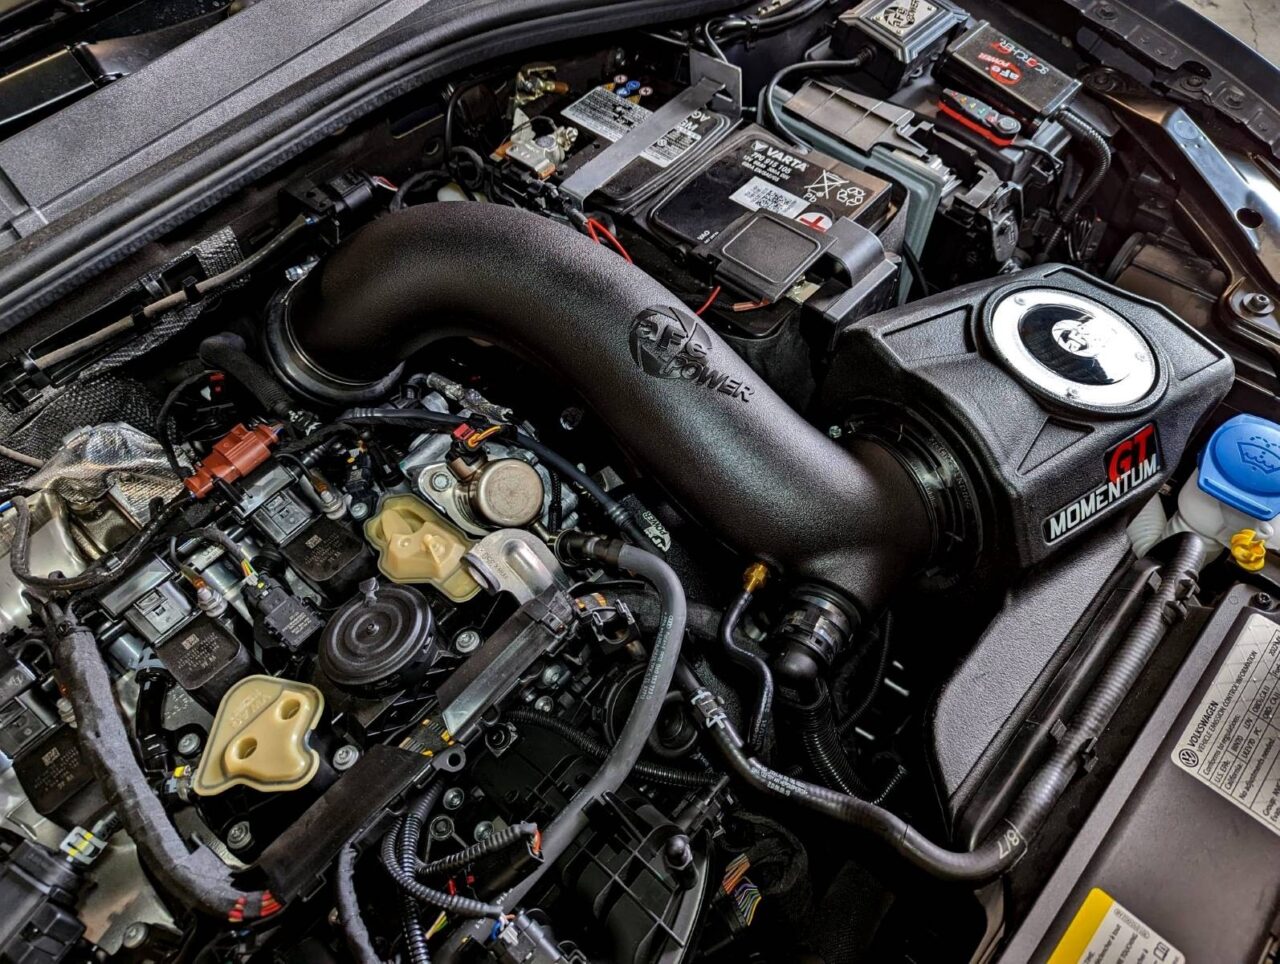 aFe POWER Aftermarket cold air intake system installed under the hood of 2022-2023 VW GTI MKV Turbo